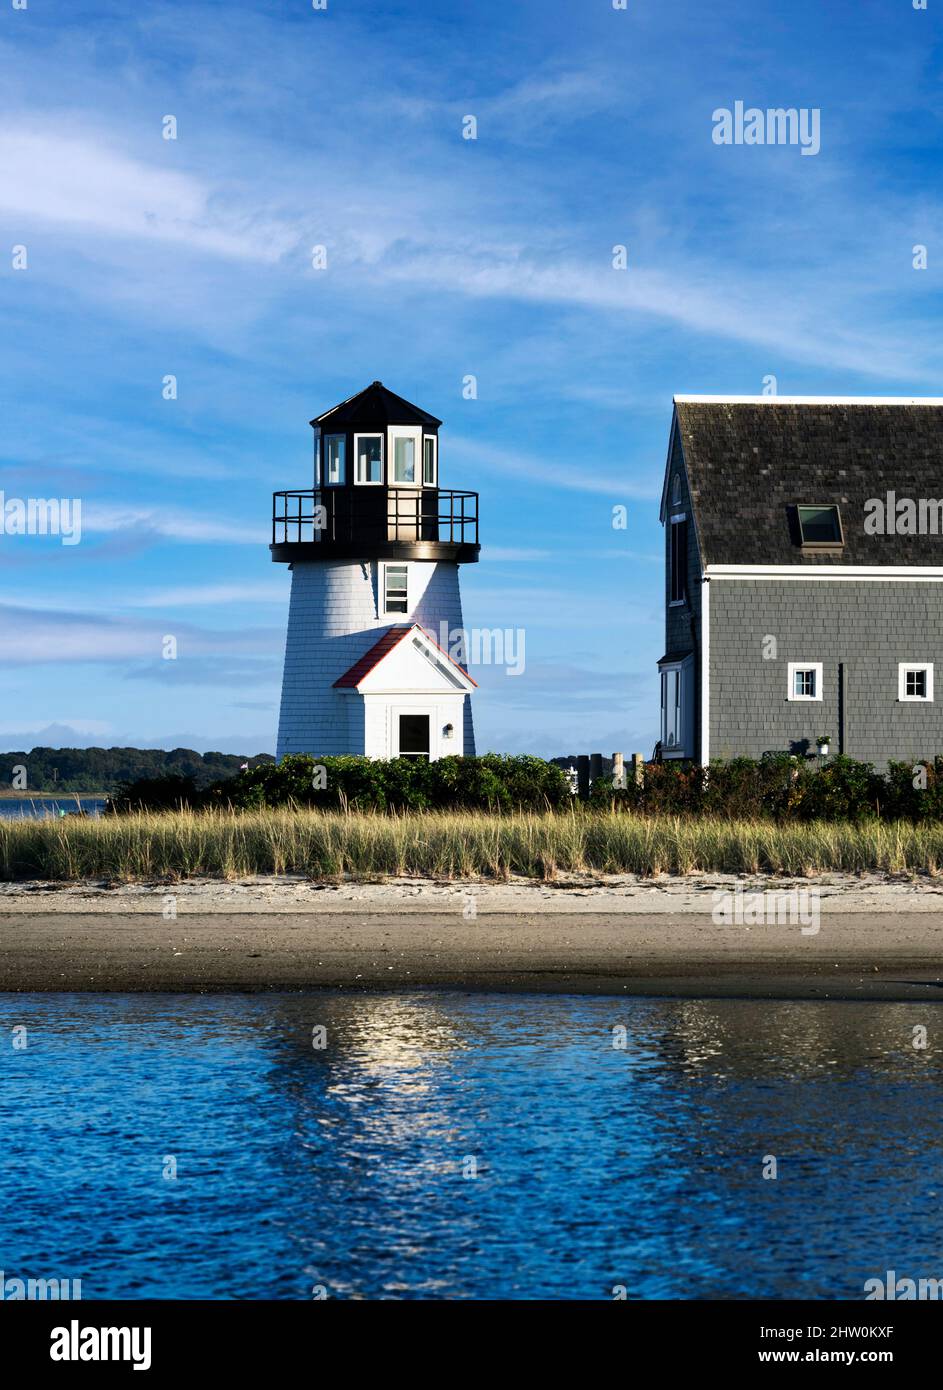 Hyannis Lighthouse, Hyannis, Cape Cod, USA. Stock Photo